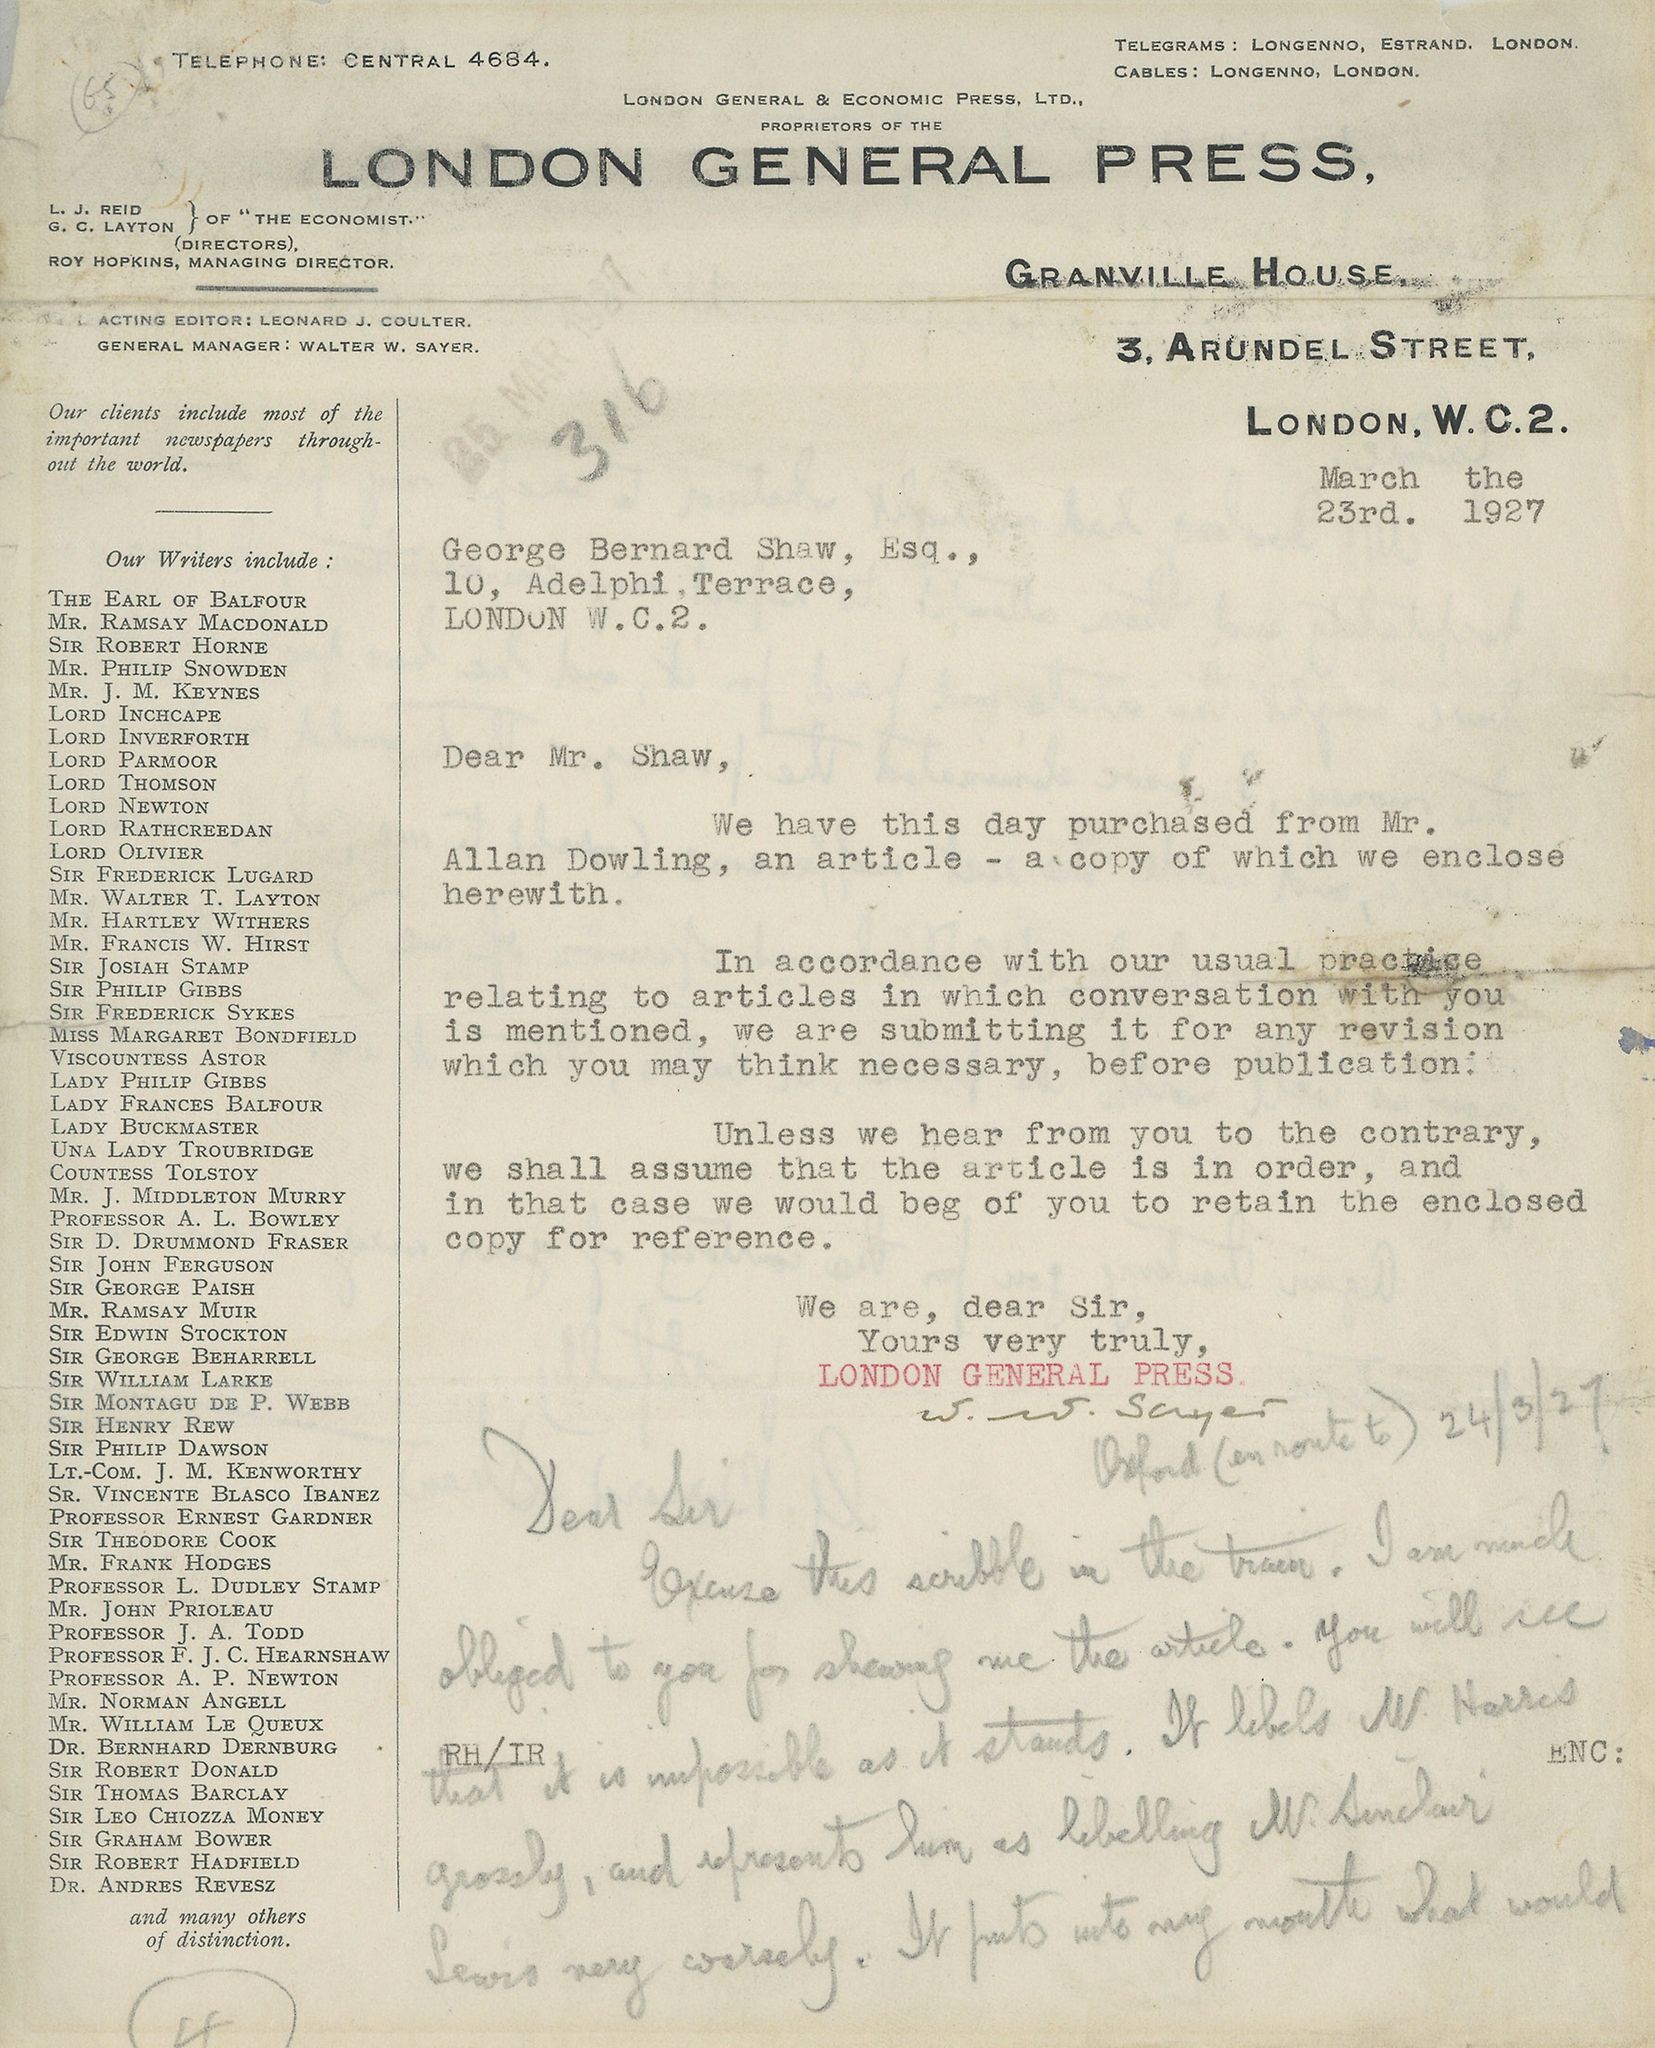 SHAW, GEORGE BERNARD - Autograph letter signed written in pencil below a typed letter from Autograph